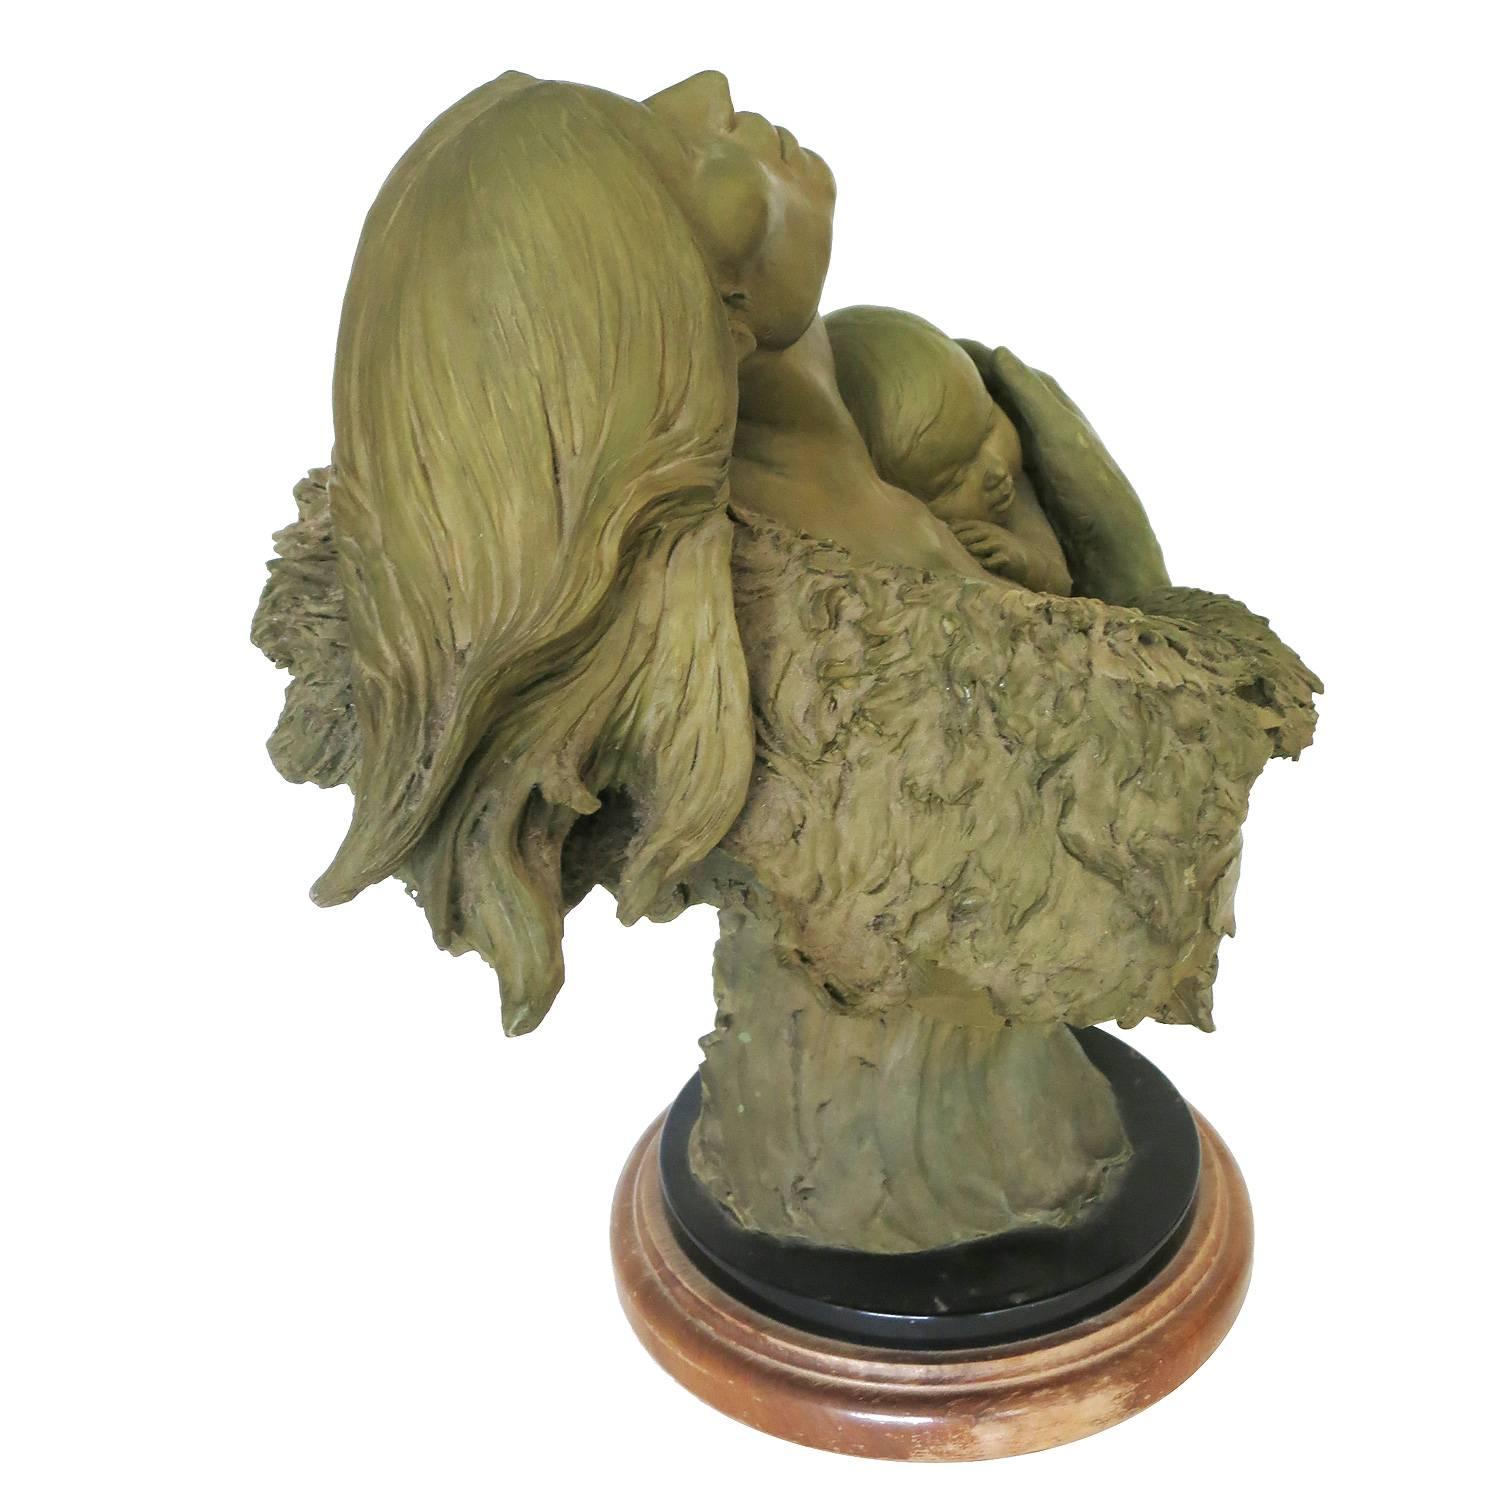 Contemporary Rare Mother and Child Sculpture Bust by Joe Slockbower for Mill Creek Studios For Sale